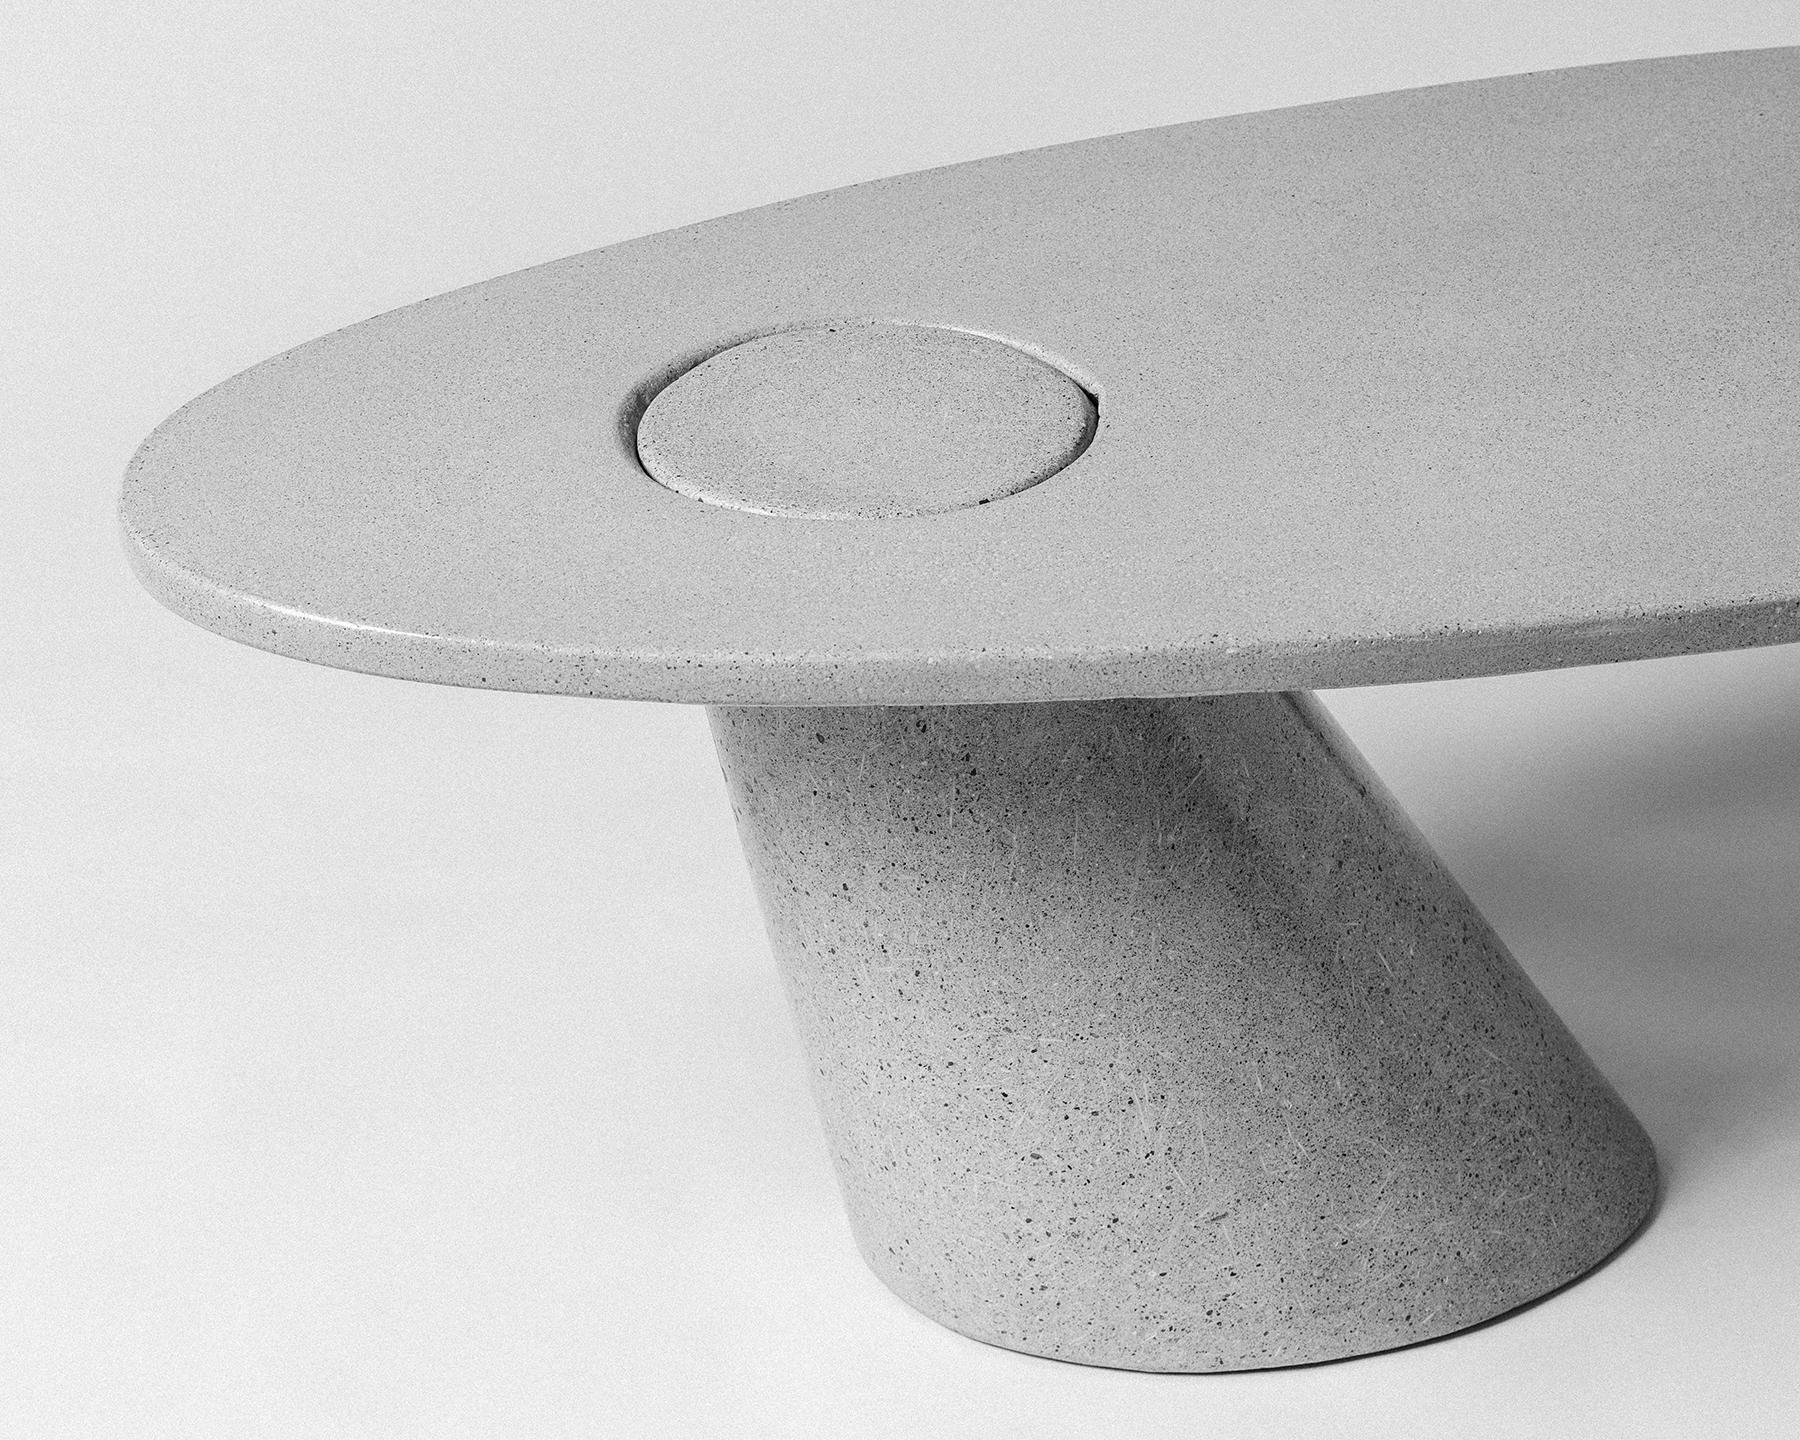 Brutalist James de Wulf Concrete Leaning Coffee Table For Sale